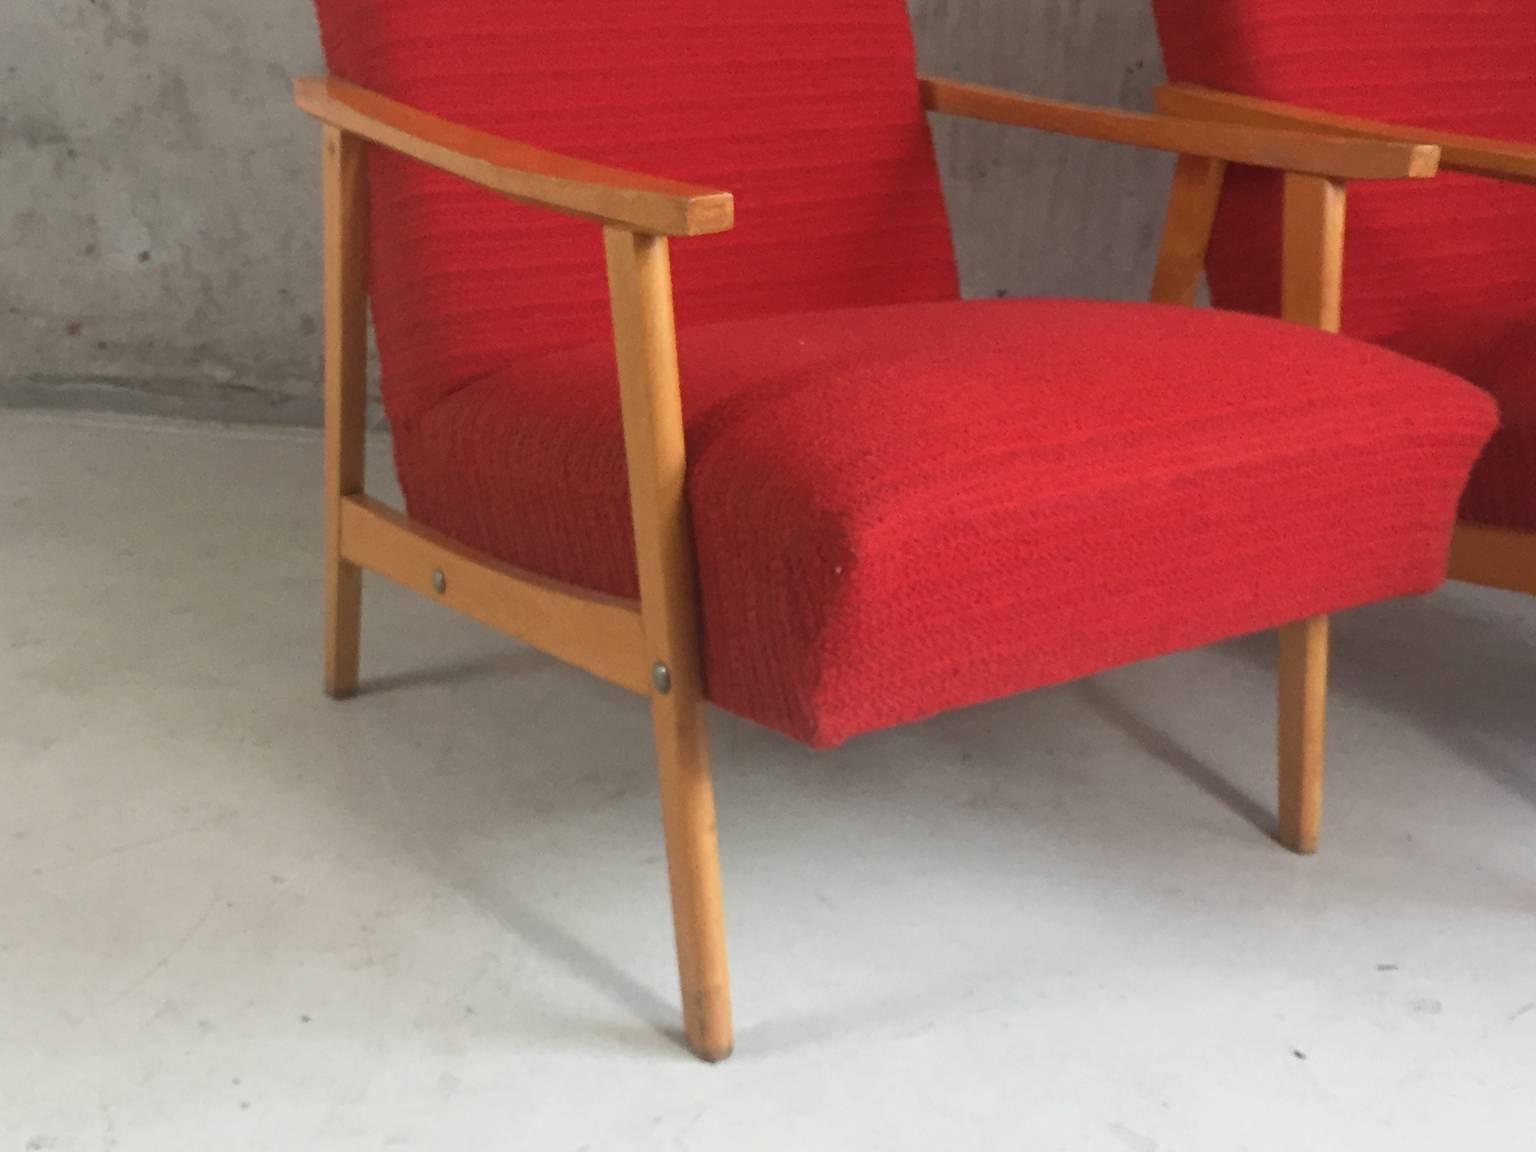 Very attractive pair of Mid-Century Modern lounge armchairs with a great shape and in fantastic condition. The wonderful brightly colored upholstery is original. Extremely comfortable.

The price listed is for the two chairs.
 